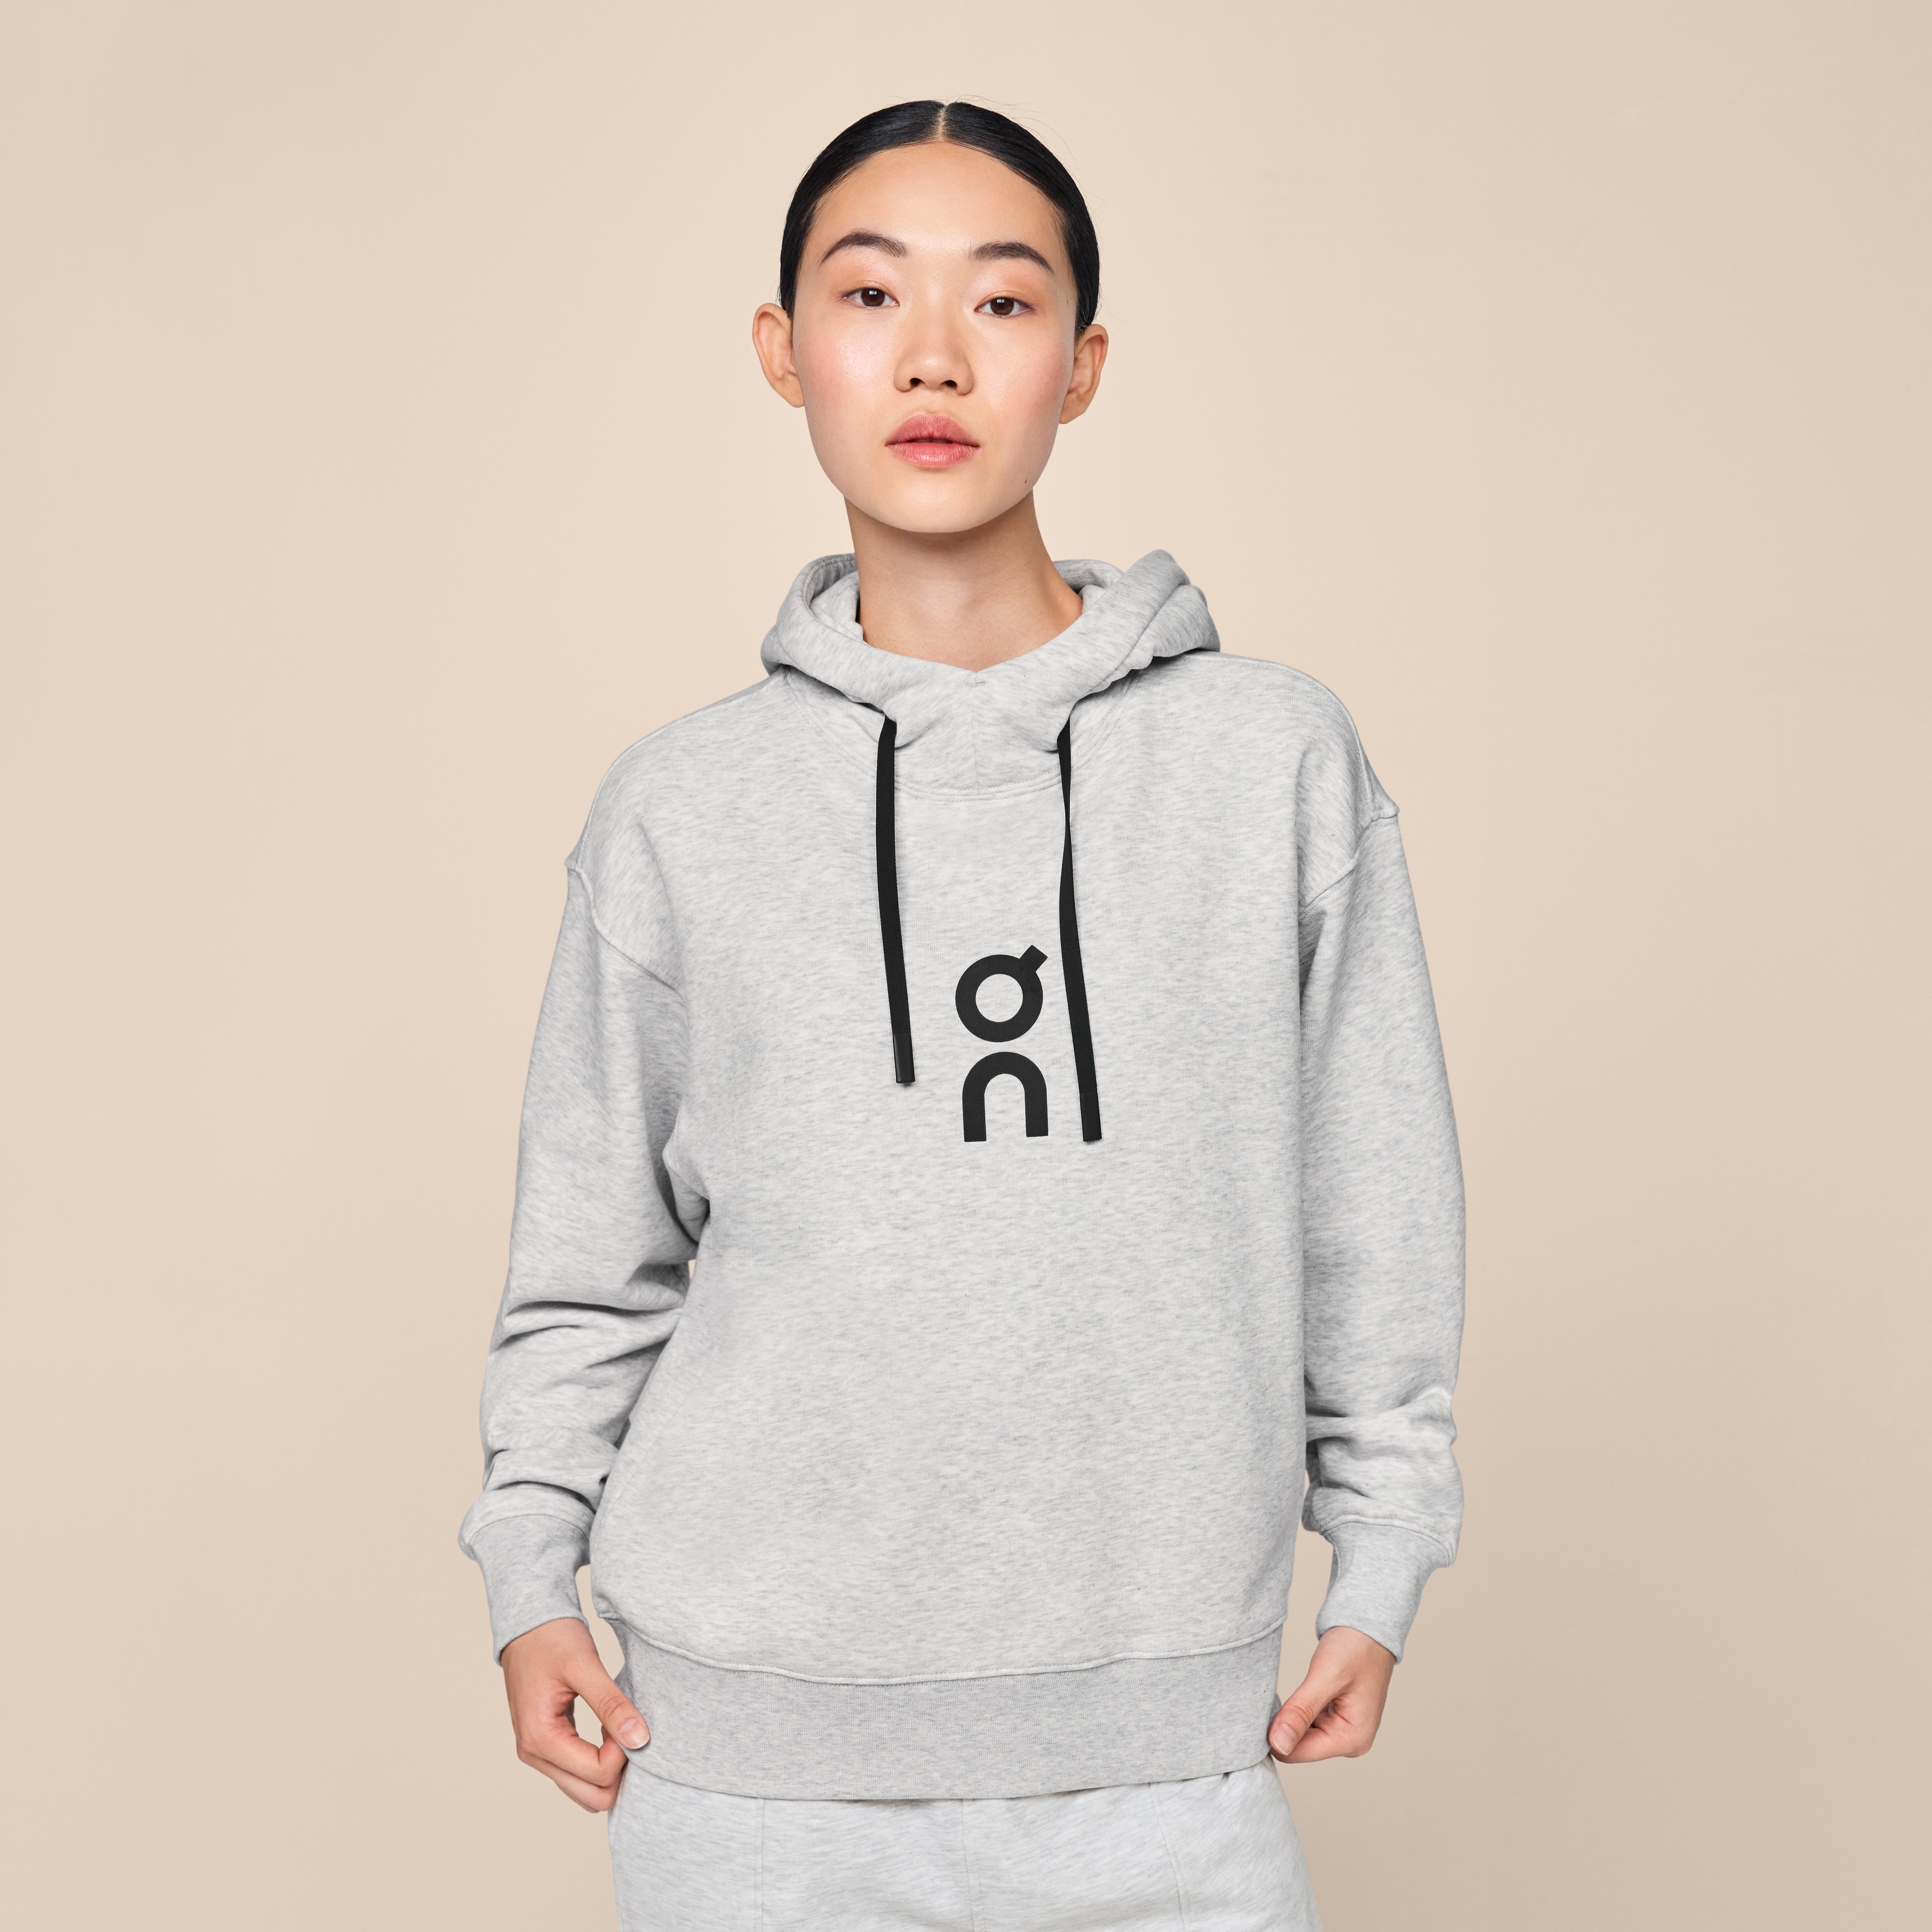 On Club Hoodie Grey Women Cold weather, recovery, travel Hoodies and sweatshirts